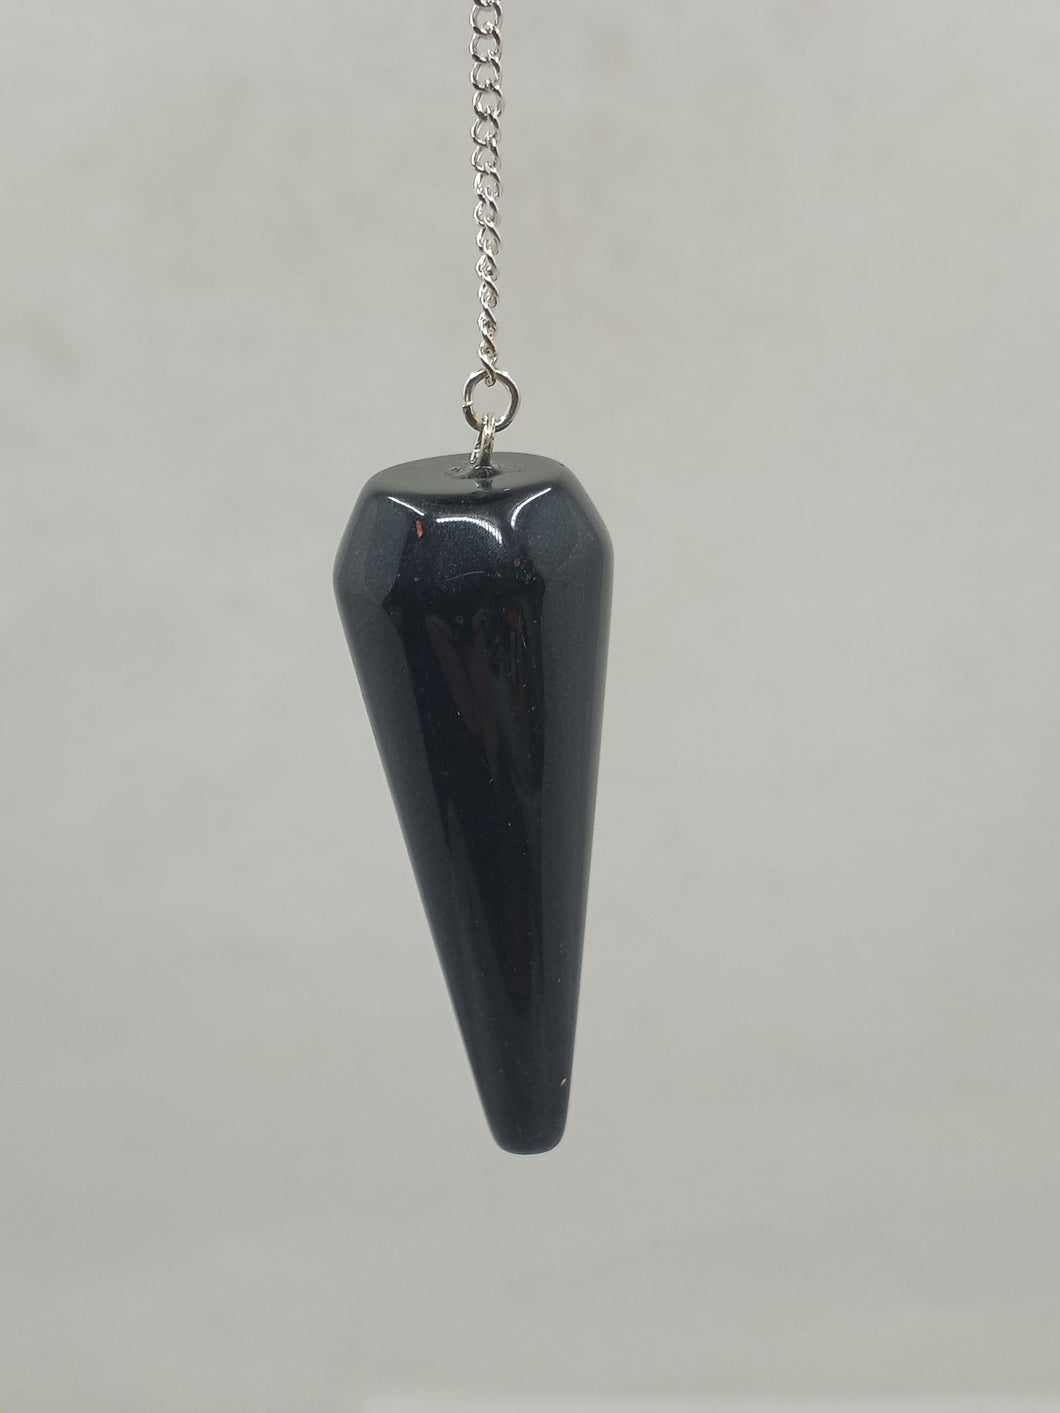 A beautiful shining black Obsidian Rounded Pendulum elegantly hangs from a silver chain.